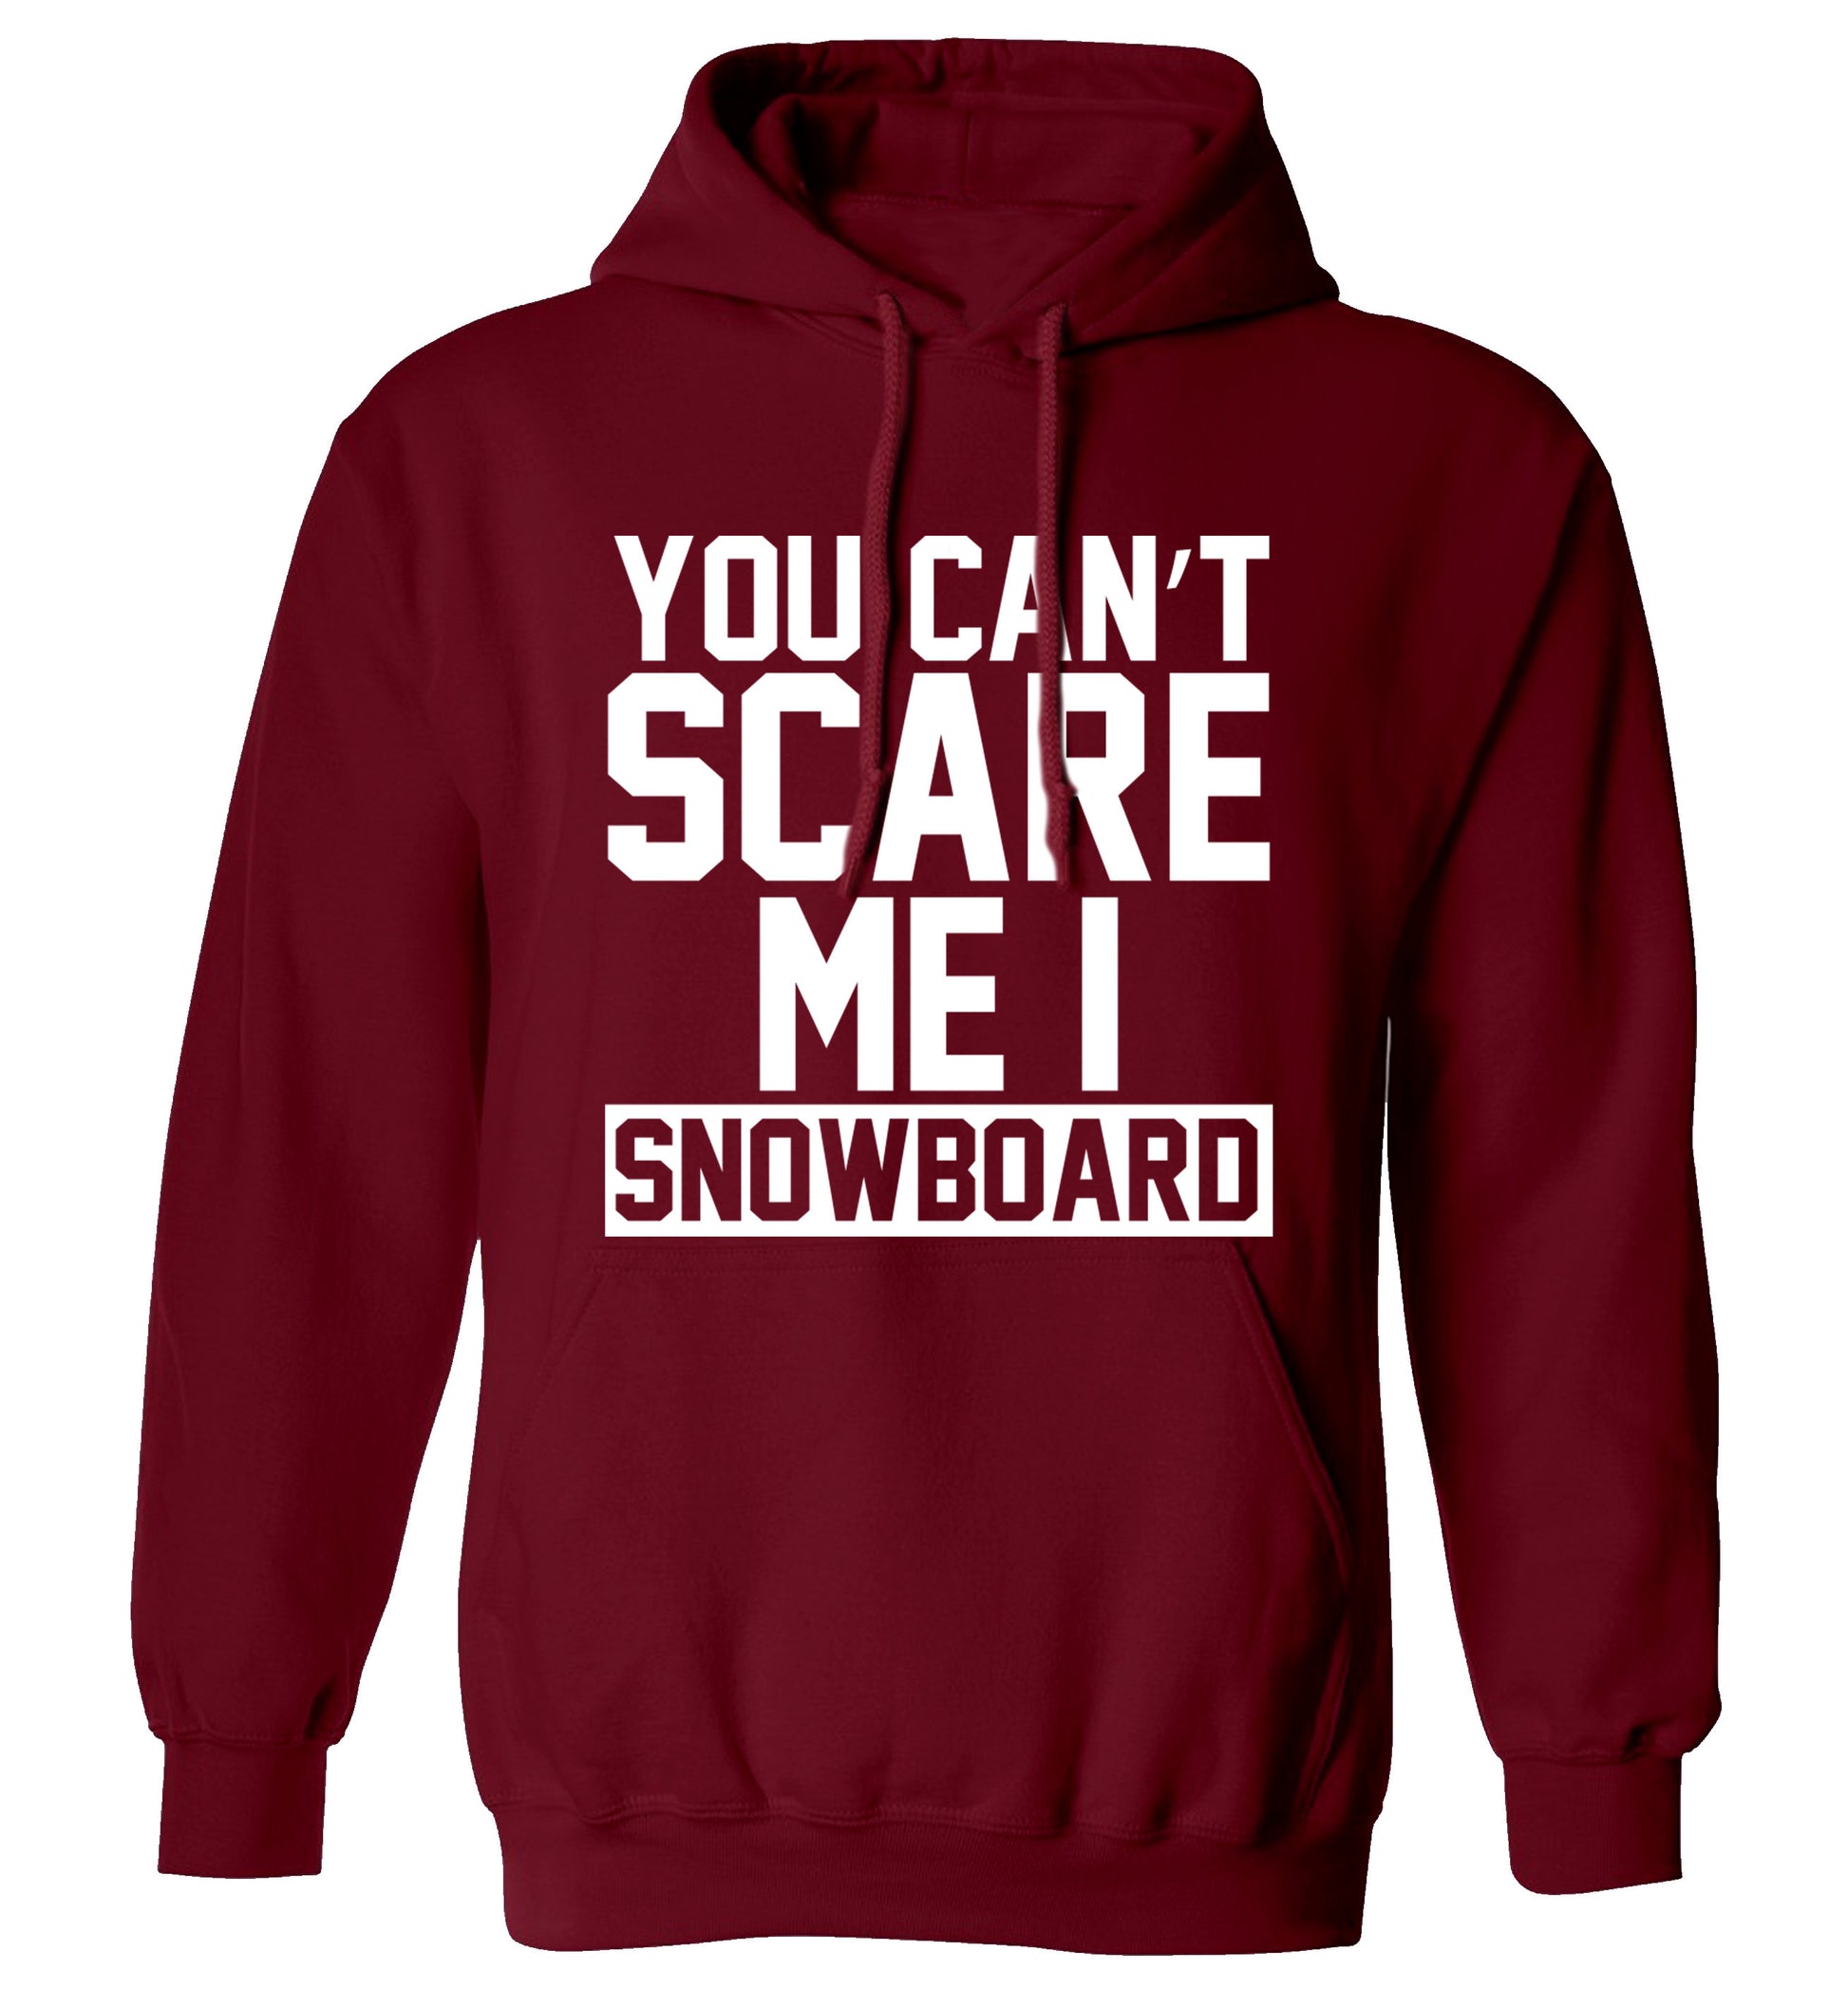 You can't scare me I snowboard adults unisex maroon hoodie 2XL